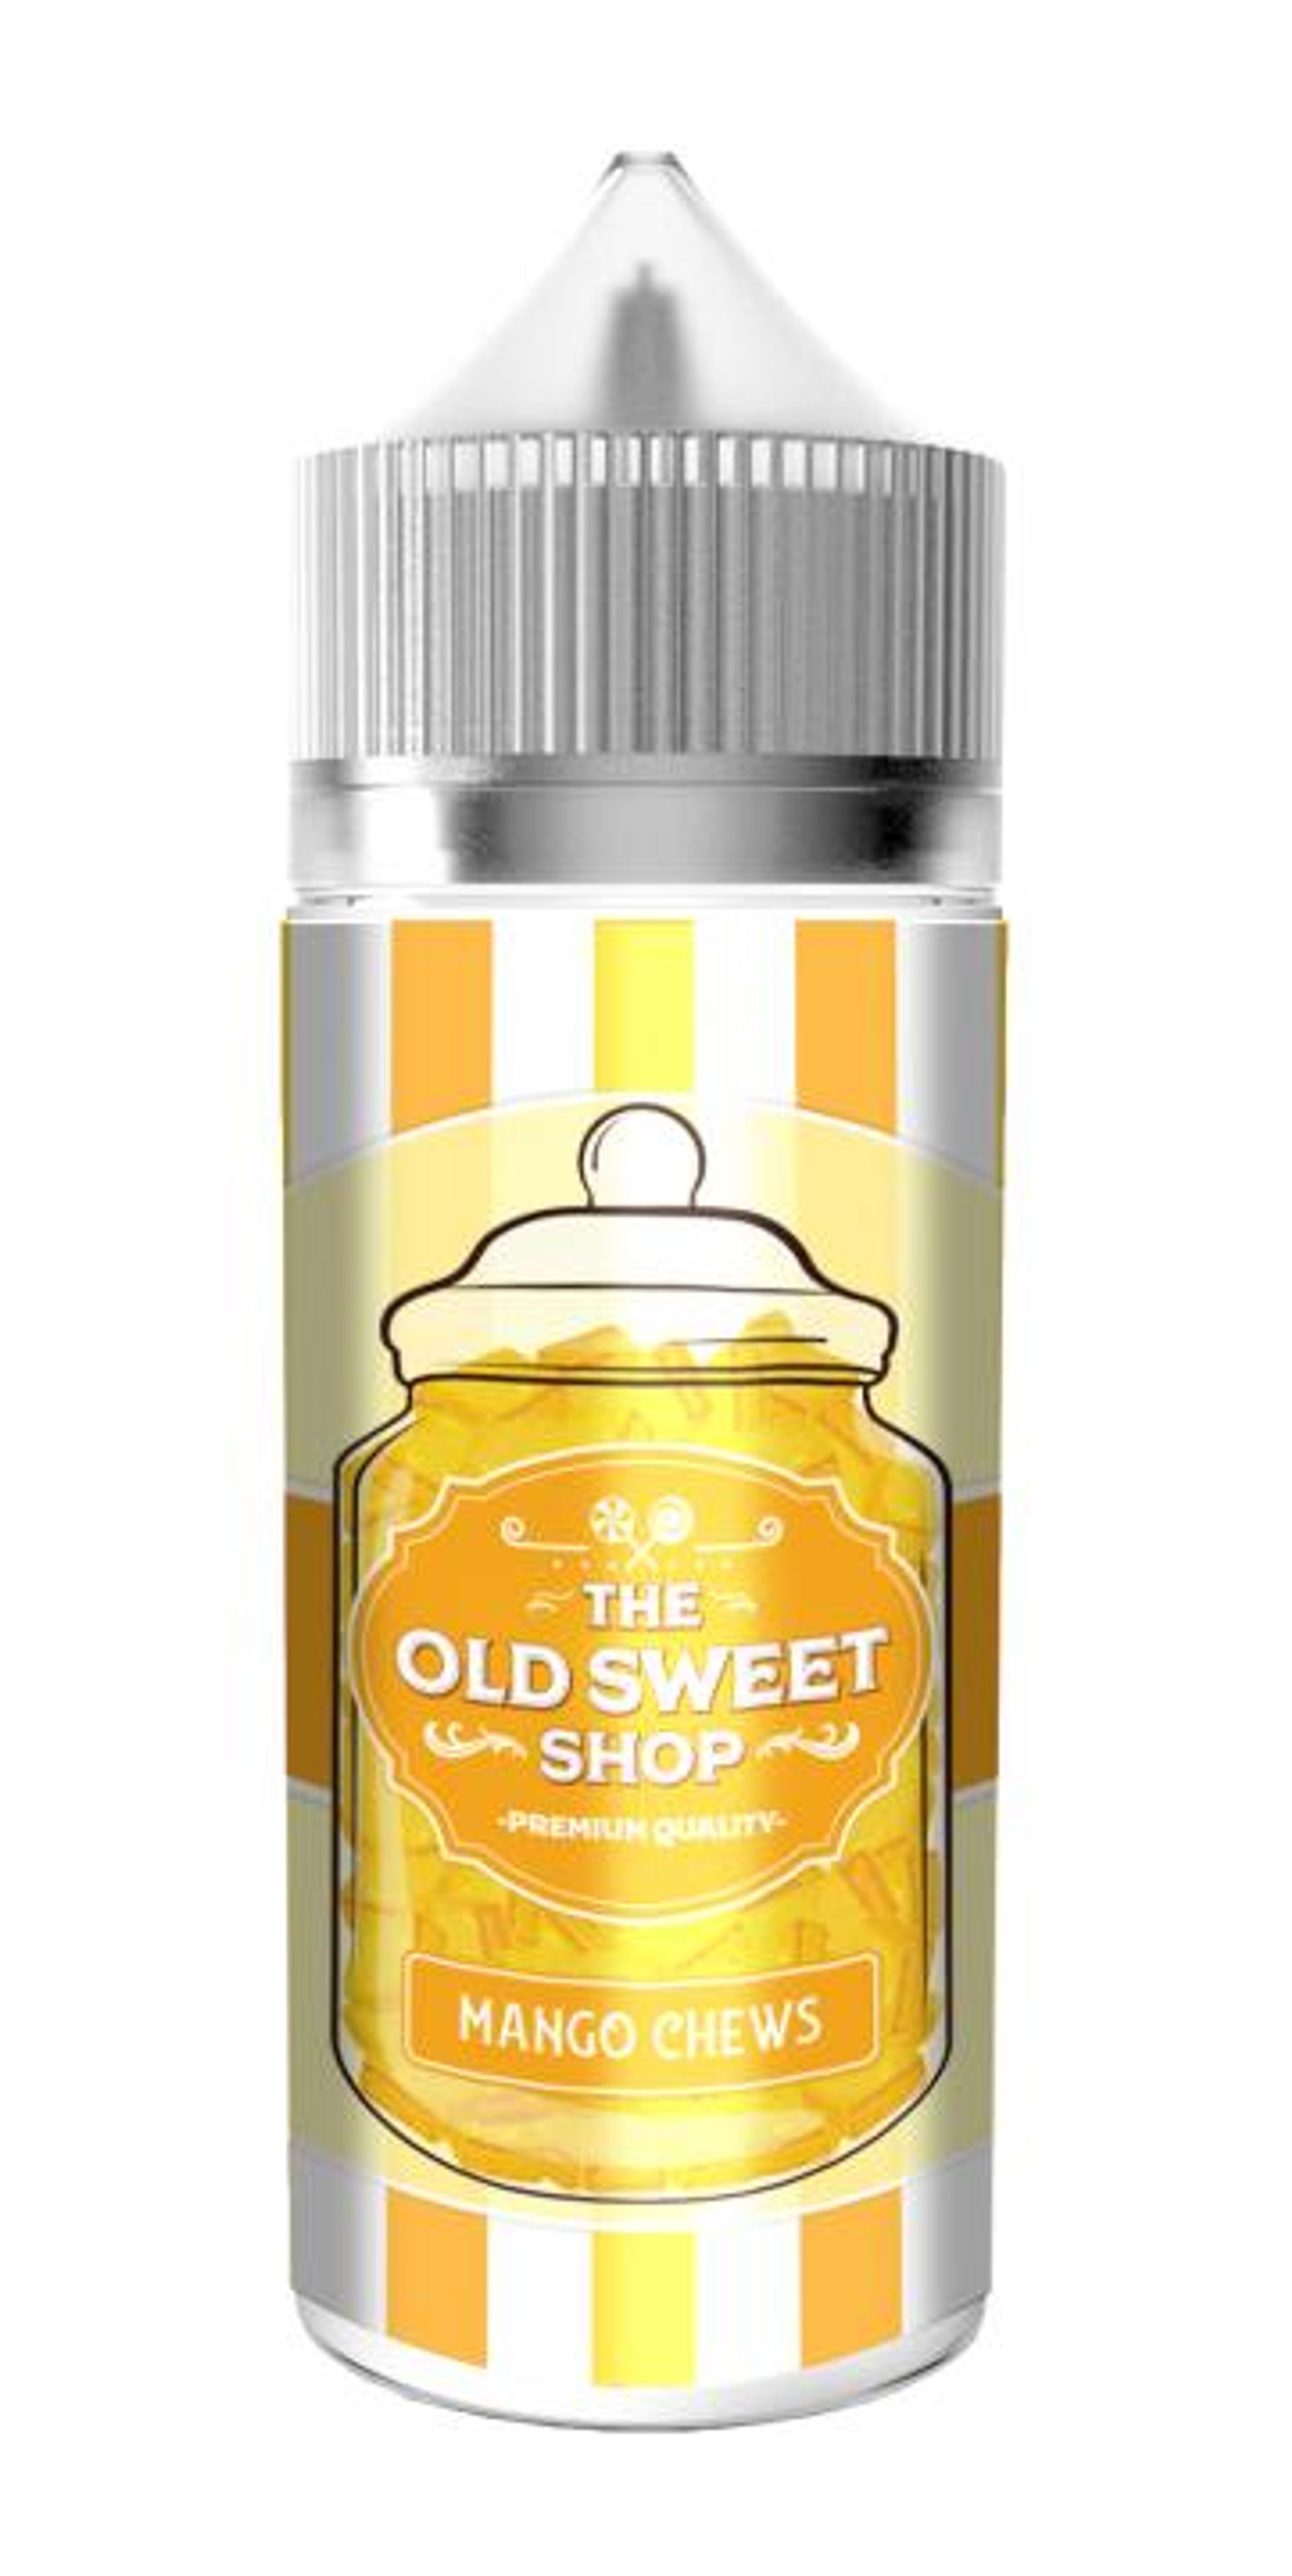 Image of Mango Chews by The Old Sweet Shop